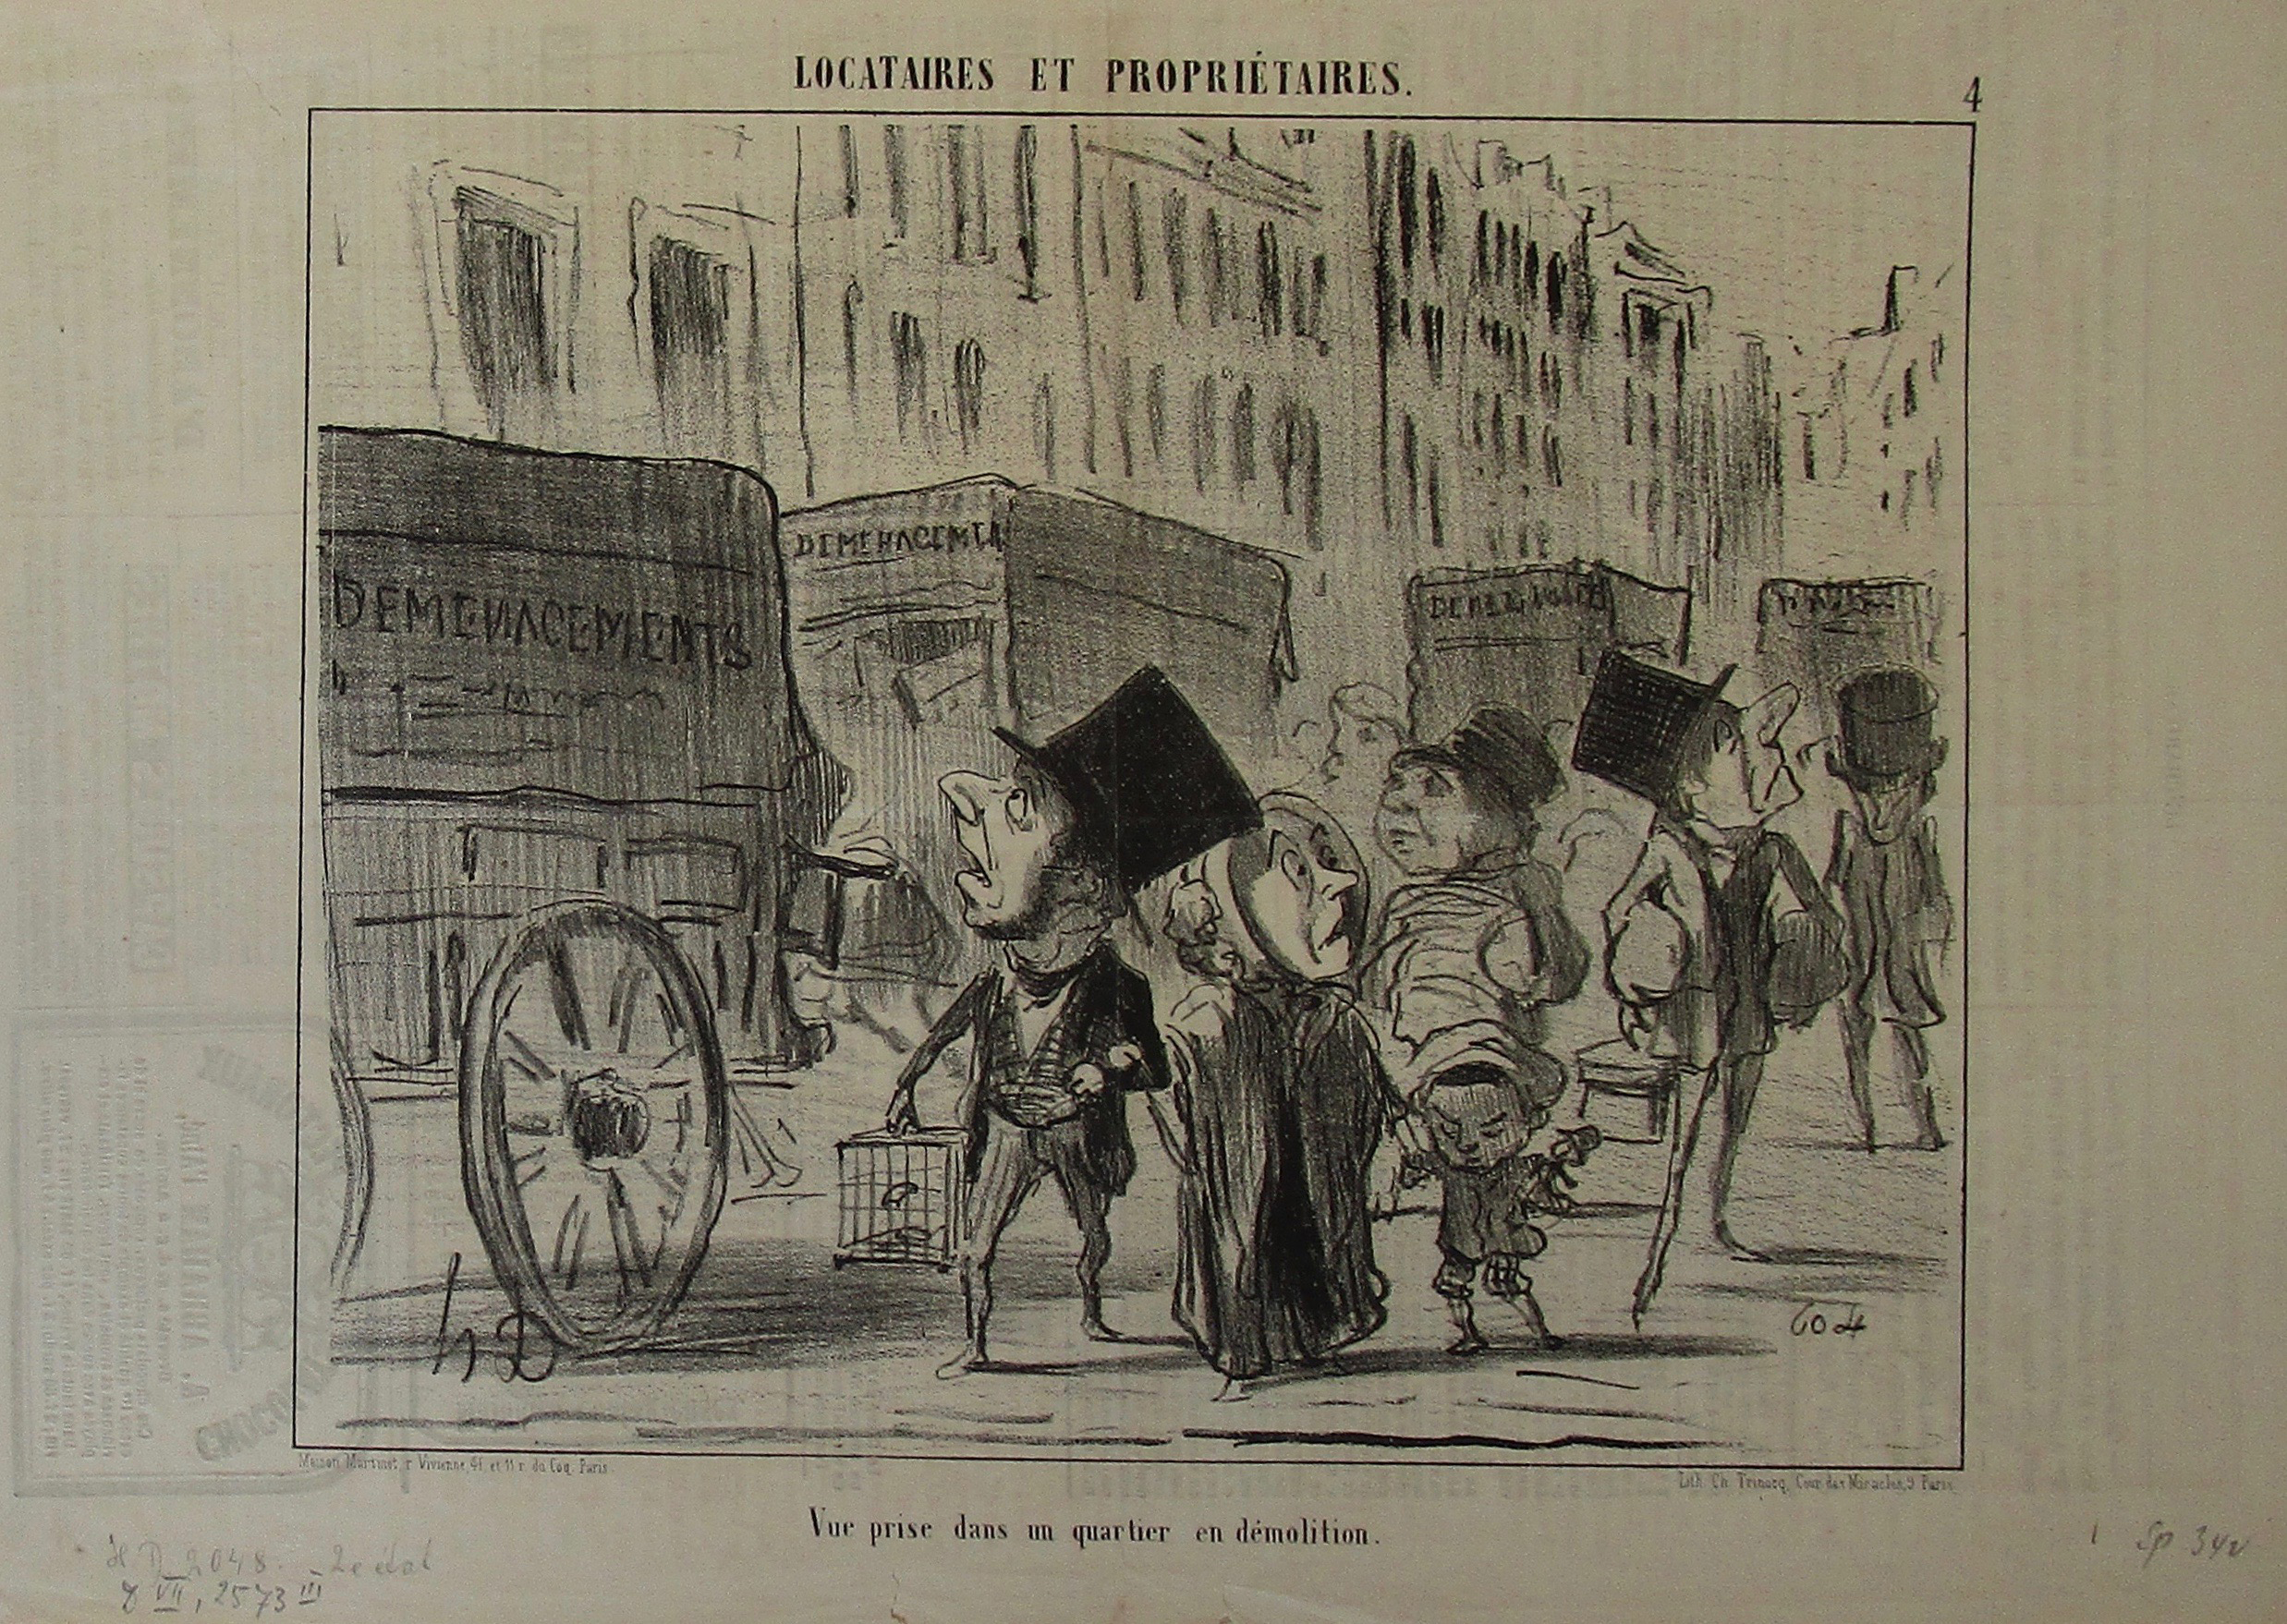 A black and white image of a line of people walking alongside a group of carriages on a road. They all have large heads and top hats. To the left of the carriages are towering buildings with windows.